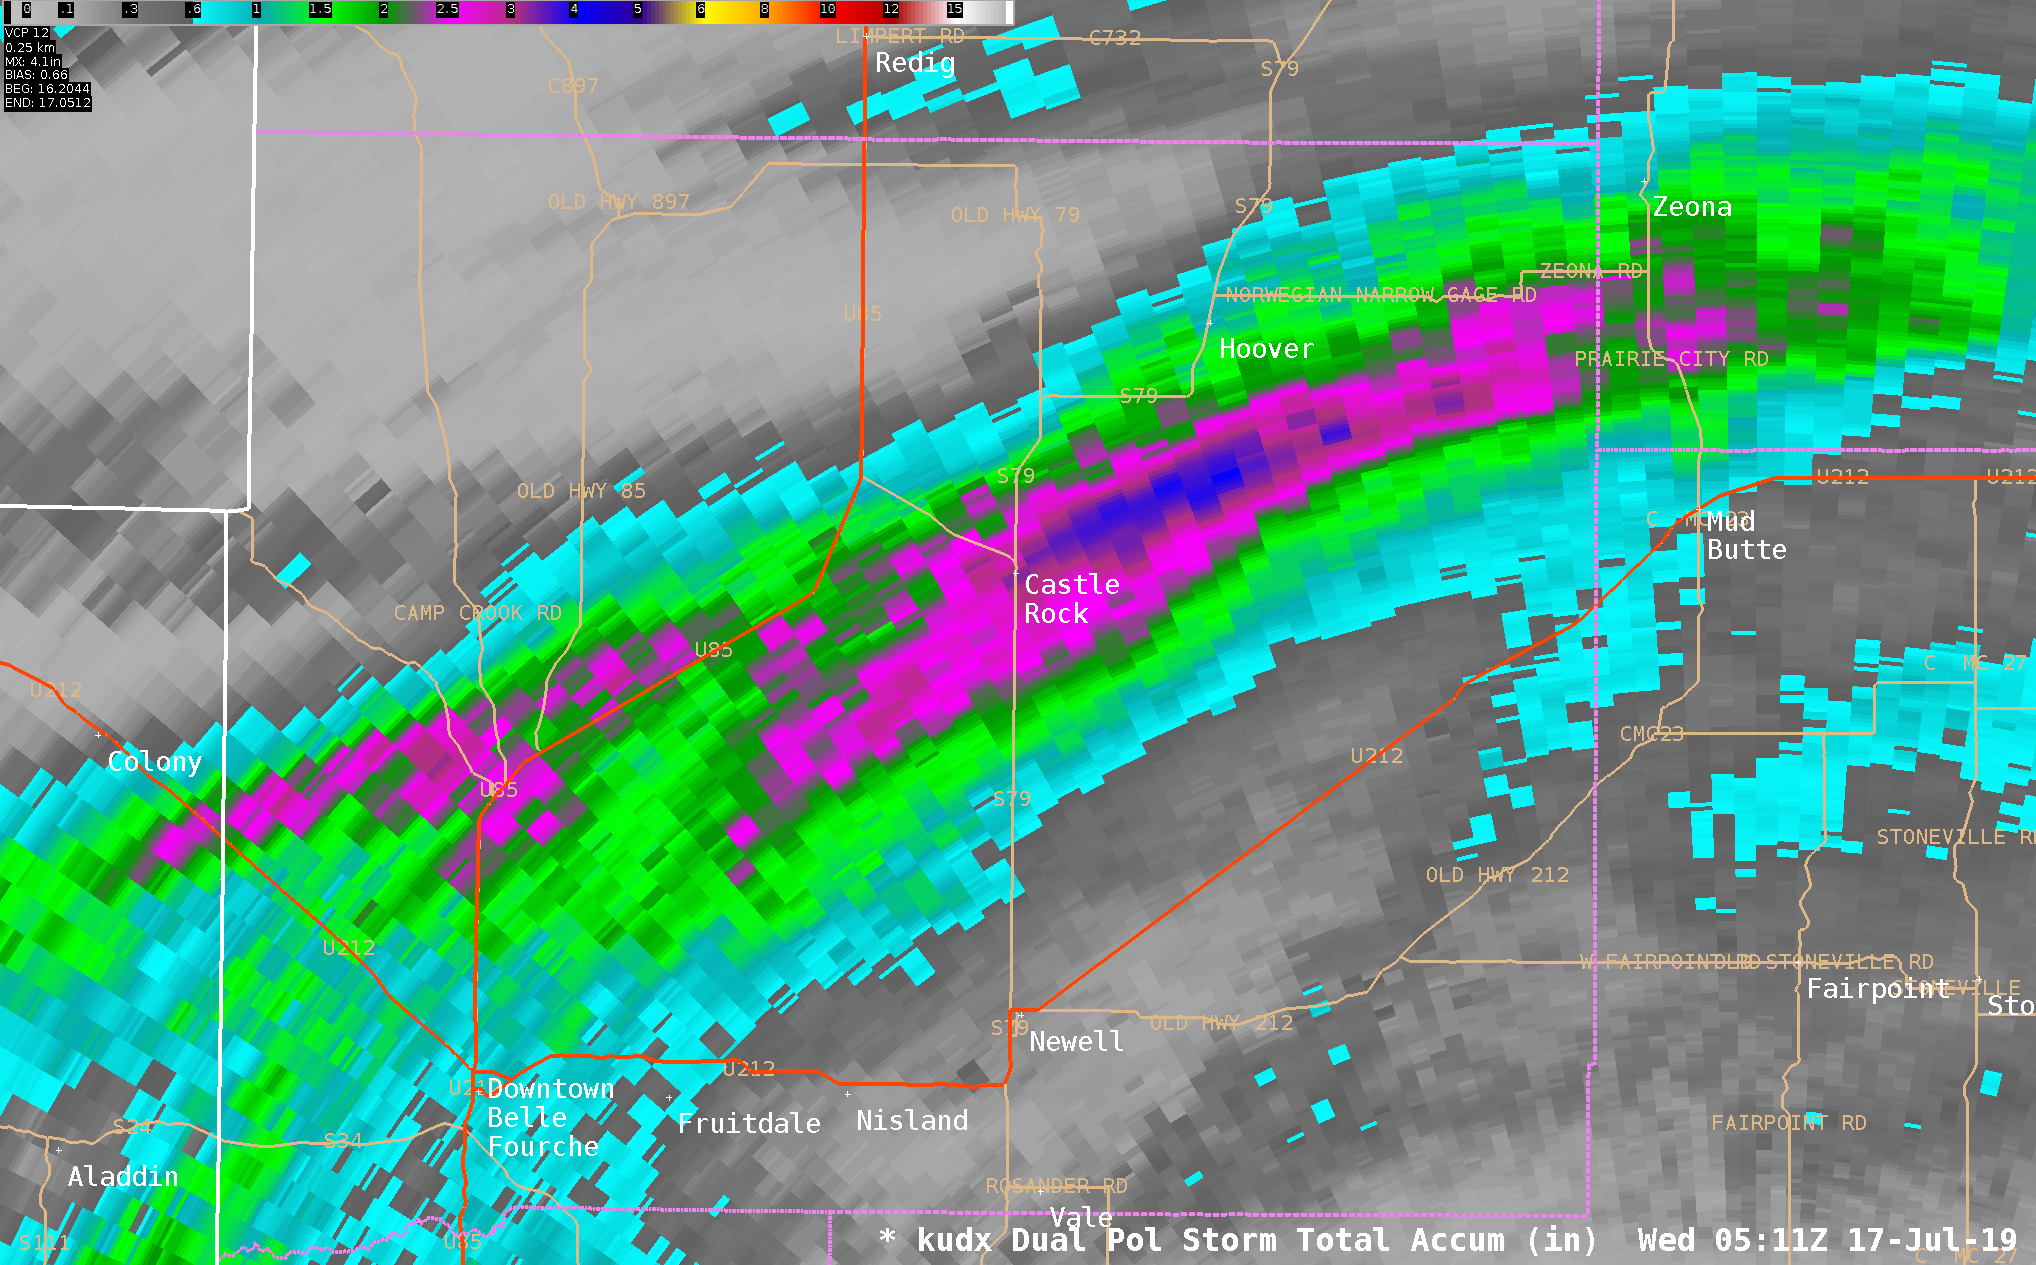 Radar estimated rainfall from 2:44 to 11:12 pm MDT on July 16th, 2019